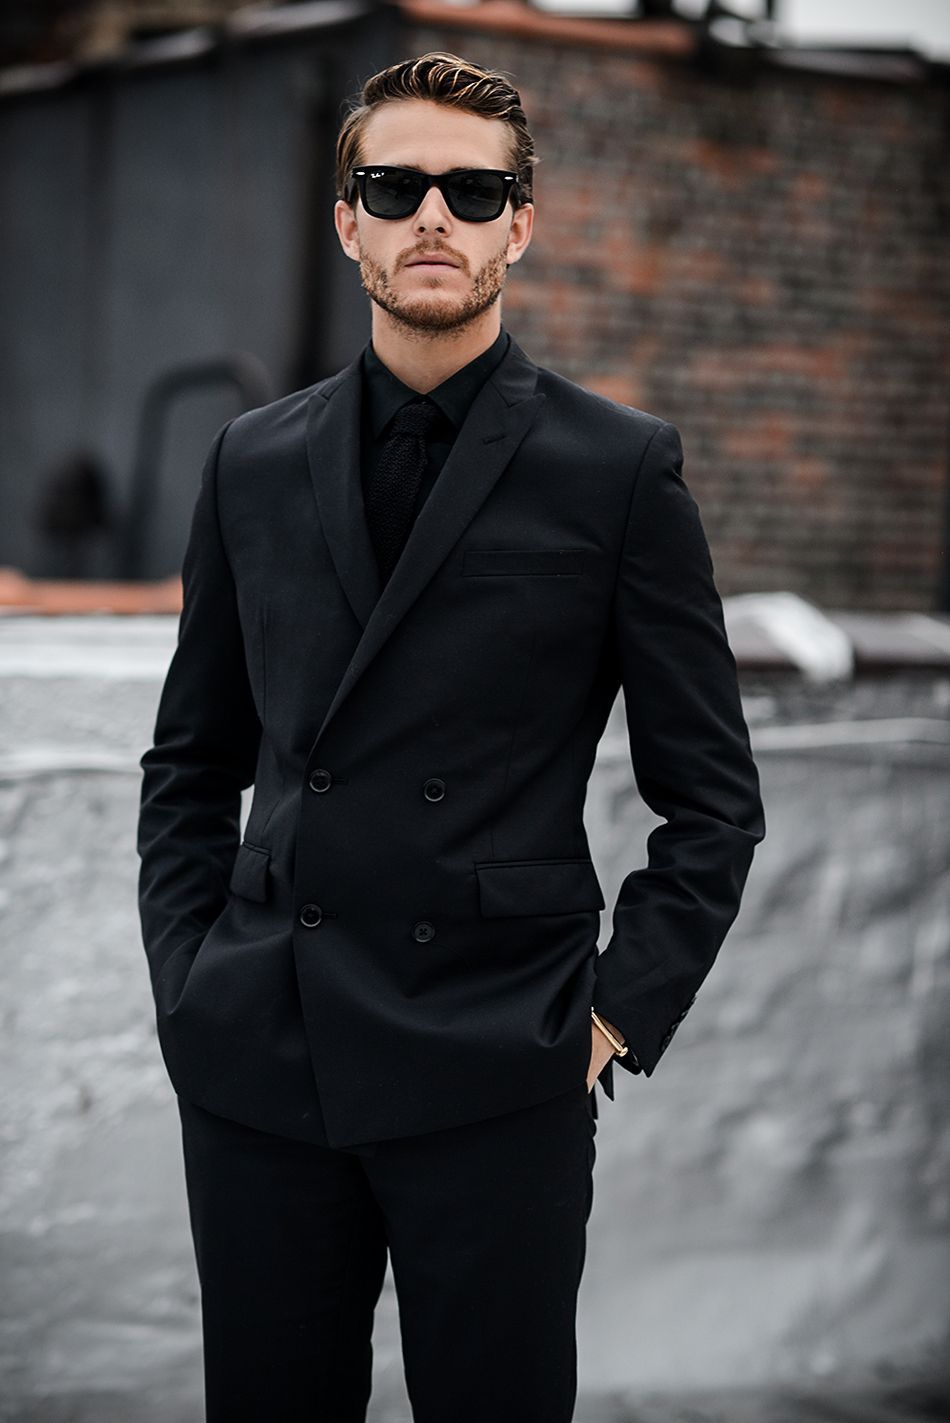 Blogger Adam Gallagher (IamGalla) keeping cool in this all black look.